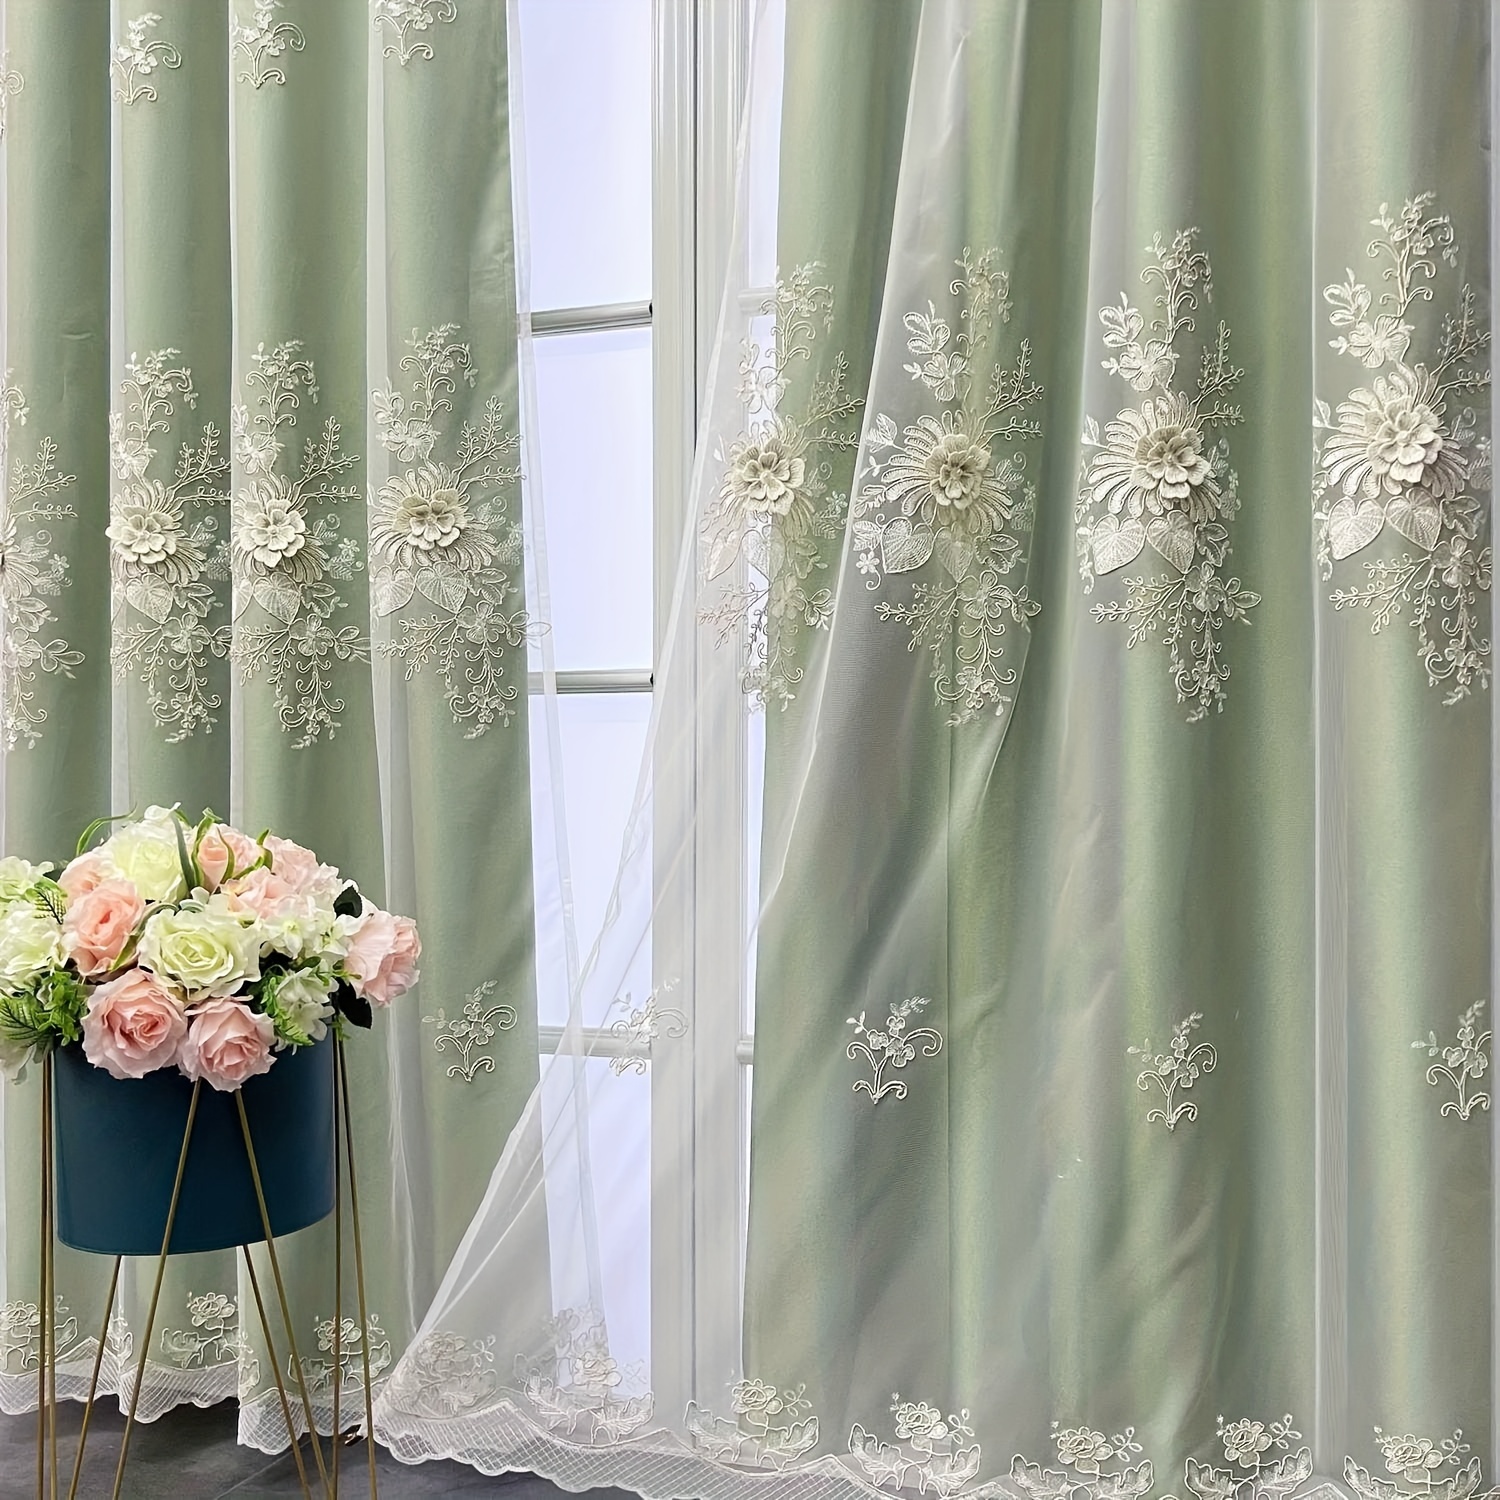 Romantic 3d Flower Embroidery Tulle Curtains For Living Room And Bedroom -  Double Layer High Blackout And Thermal Insulation - Privacy Protection And  Sliding Door Cover - Beige, Green, Grey, And Colors 